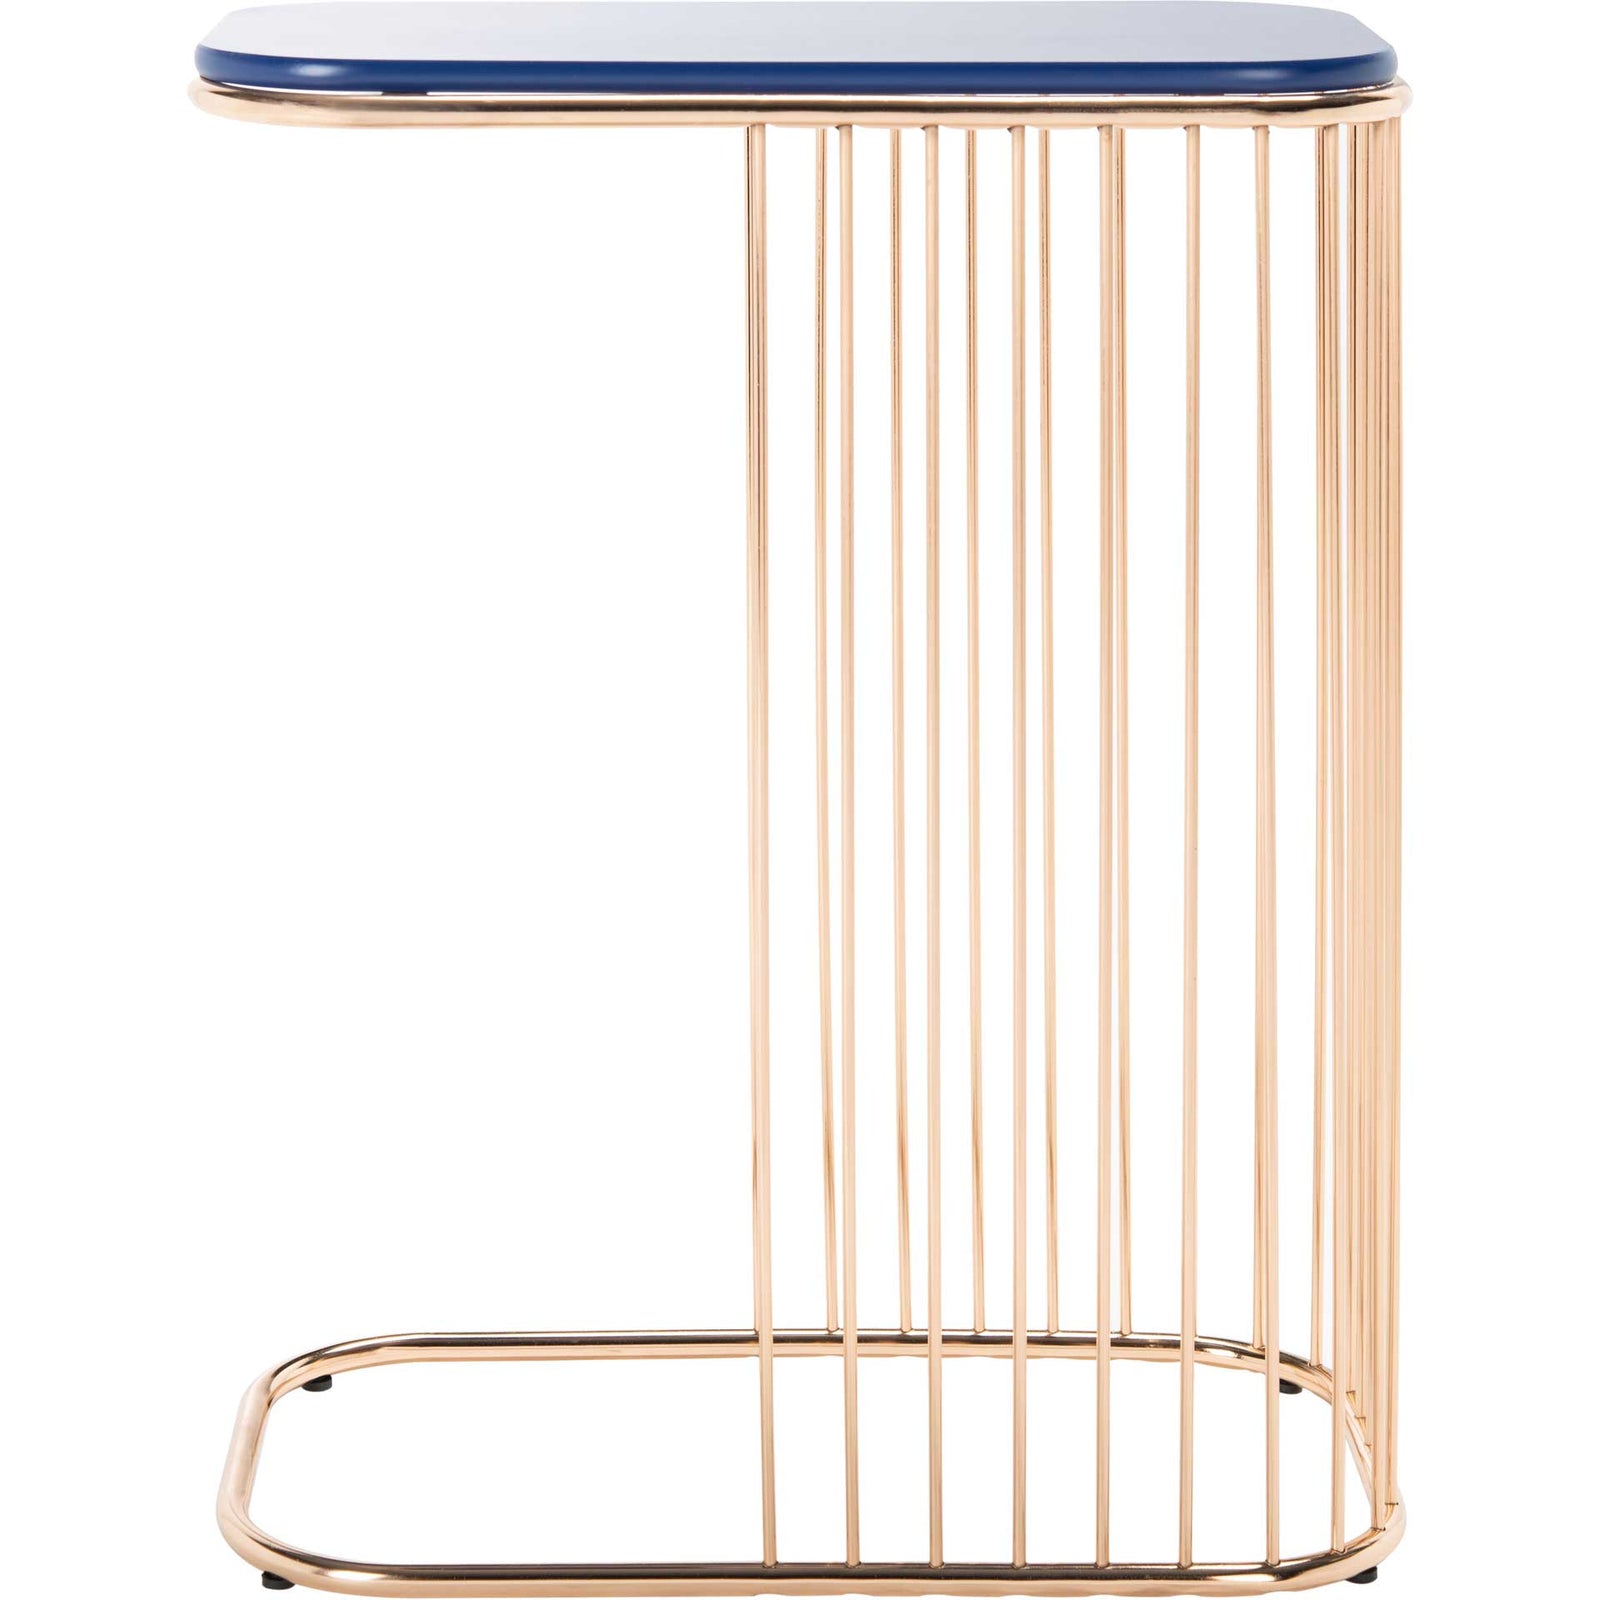 Stazia Side Table Blue/Gold